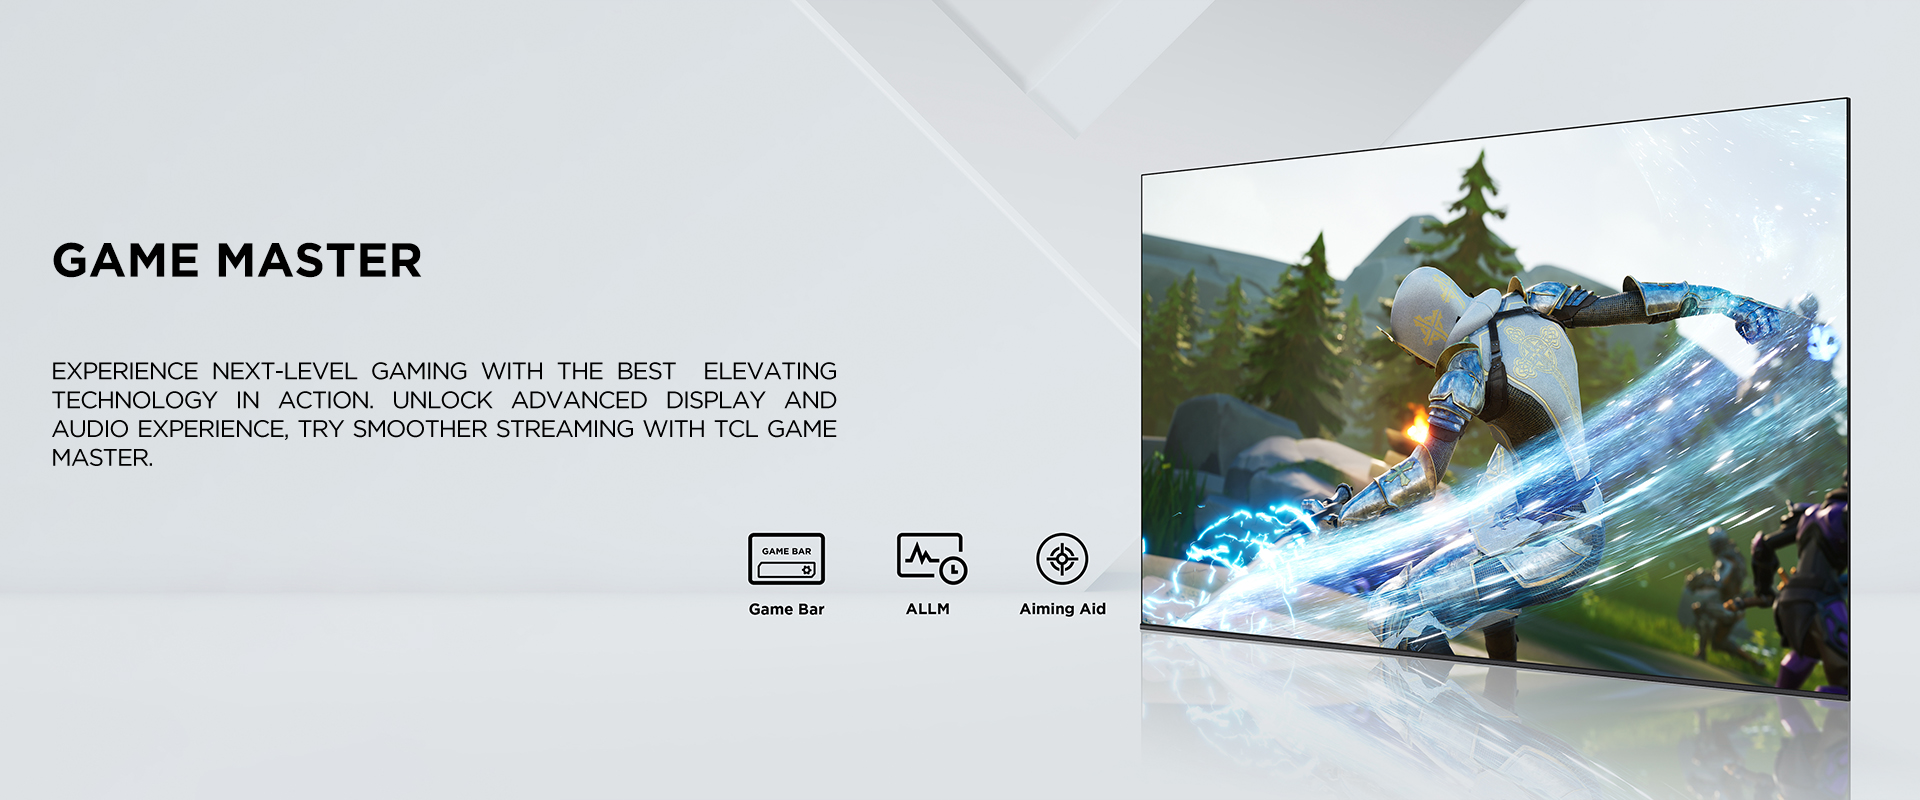 game master
    - Experience next-level gaming with the best elevating technology in action. Unlock advanced display and audio experience, try smoother streaming with TCL Game Master.